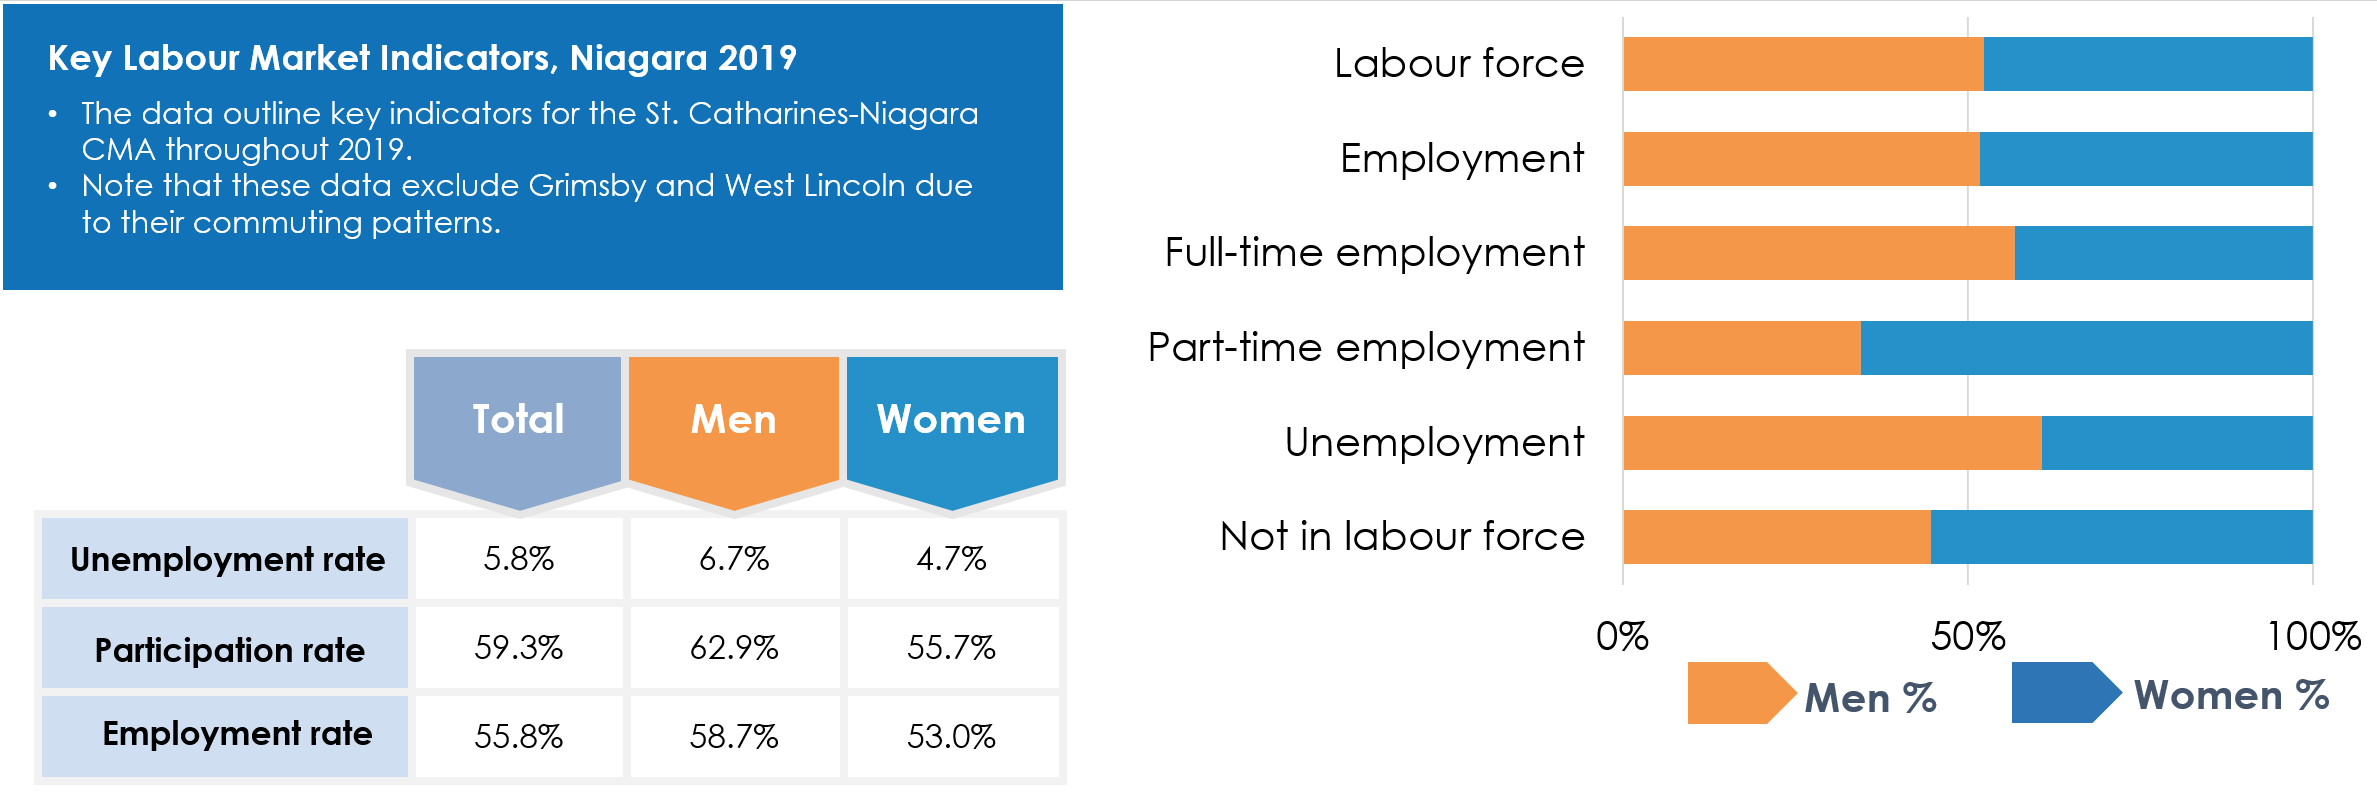 Infographic showing the following data: In 2019, the unemployment rate in the St. Catharines-Niagara CMA was at 5.8% overall, 6.7% for men and 4.7% for women. The participation rate was 59.3% overall, with 62.9% of working-age men represented and 55.7% of working-age women. The employment rate totaled 55.8%, with 58.7% for men and 53.0% for women. The labour force and employment rate has fairly equal representation, with men showing greater representation in full-time employment and women more likely to be in part-time employment.